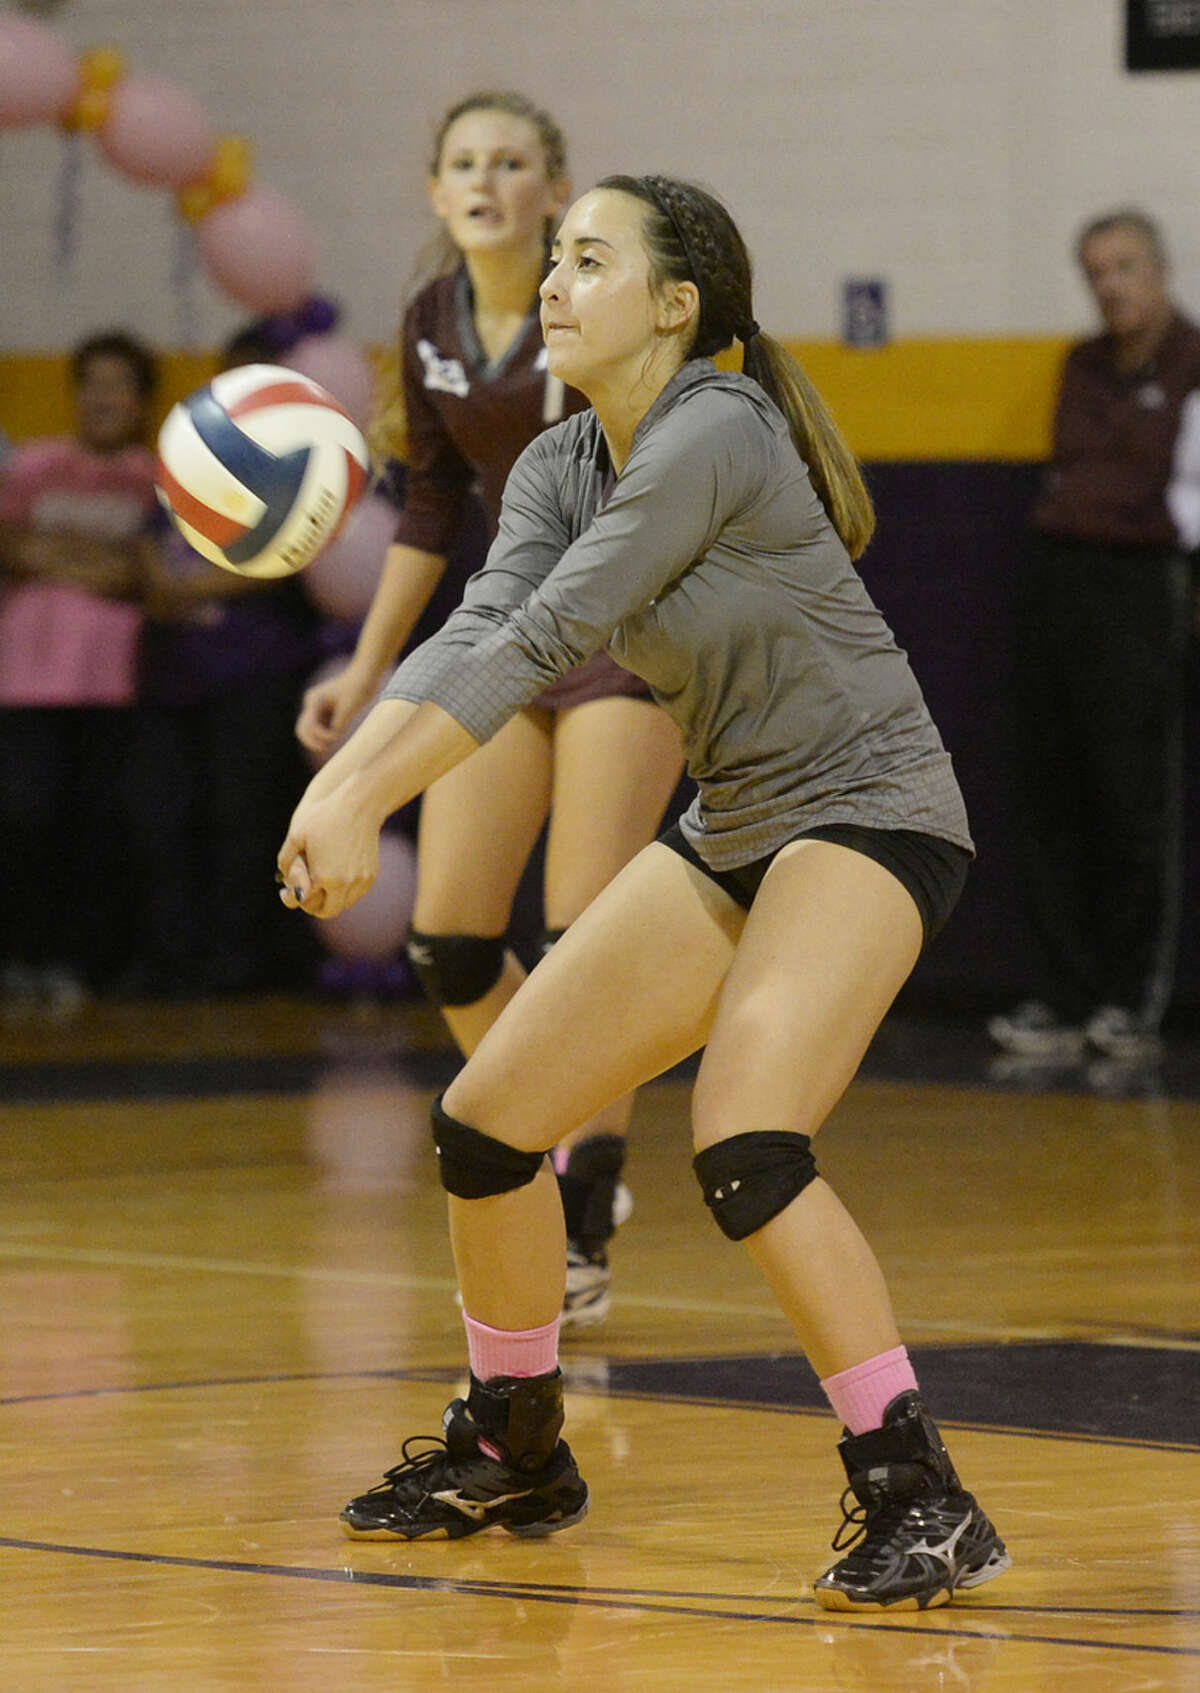 Lee High's Shelby Olivas (4) receives a serve from Midland High on Tuesday, Oct. 20, 2015, at Midland High. James Durbin/Reporter-Telegram